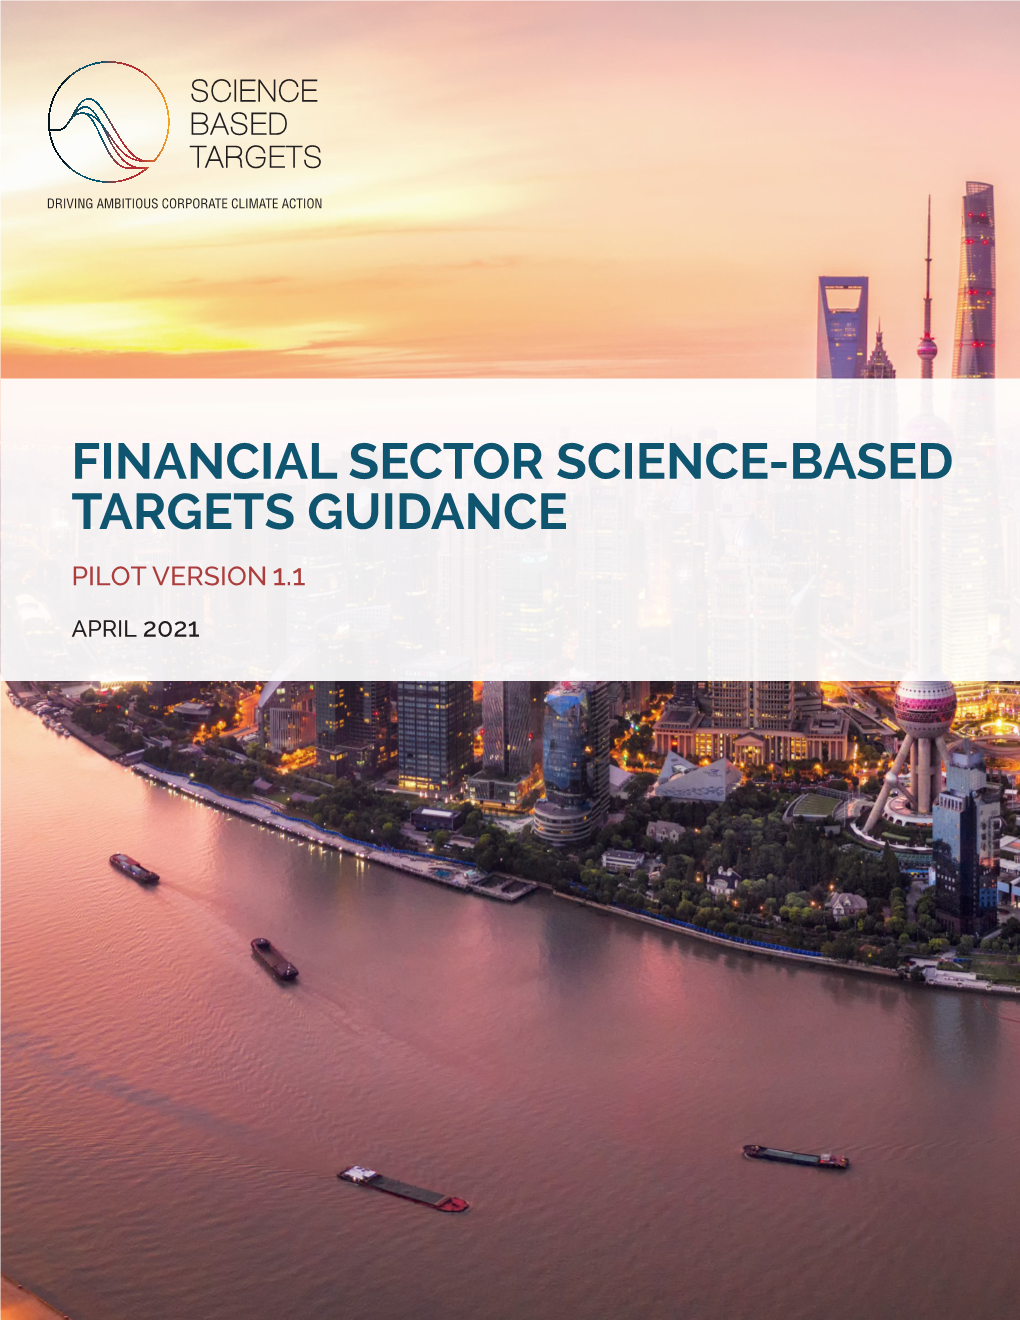 Financial Sector Science-Based Targets Guidance Pilot Version 1.1